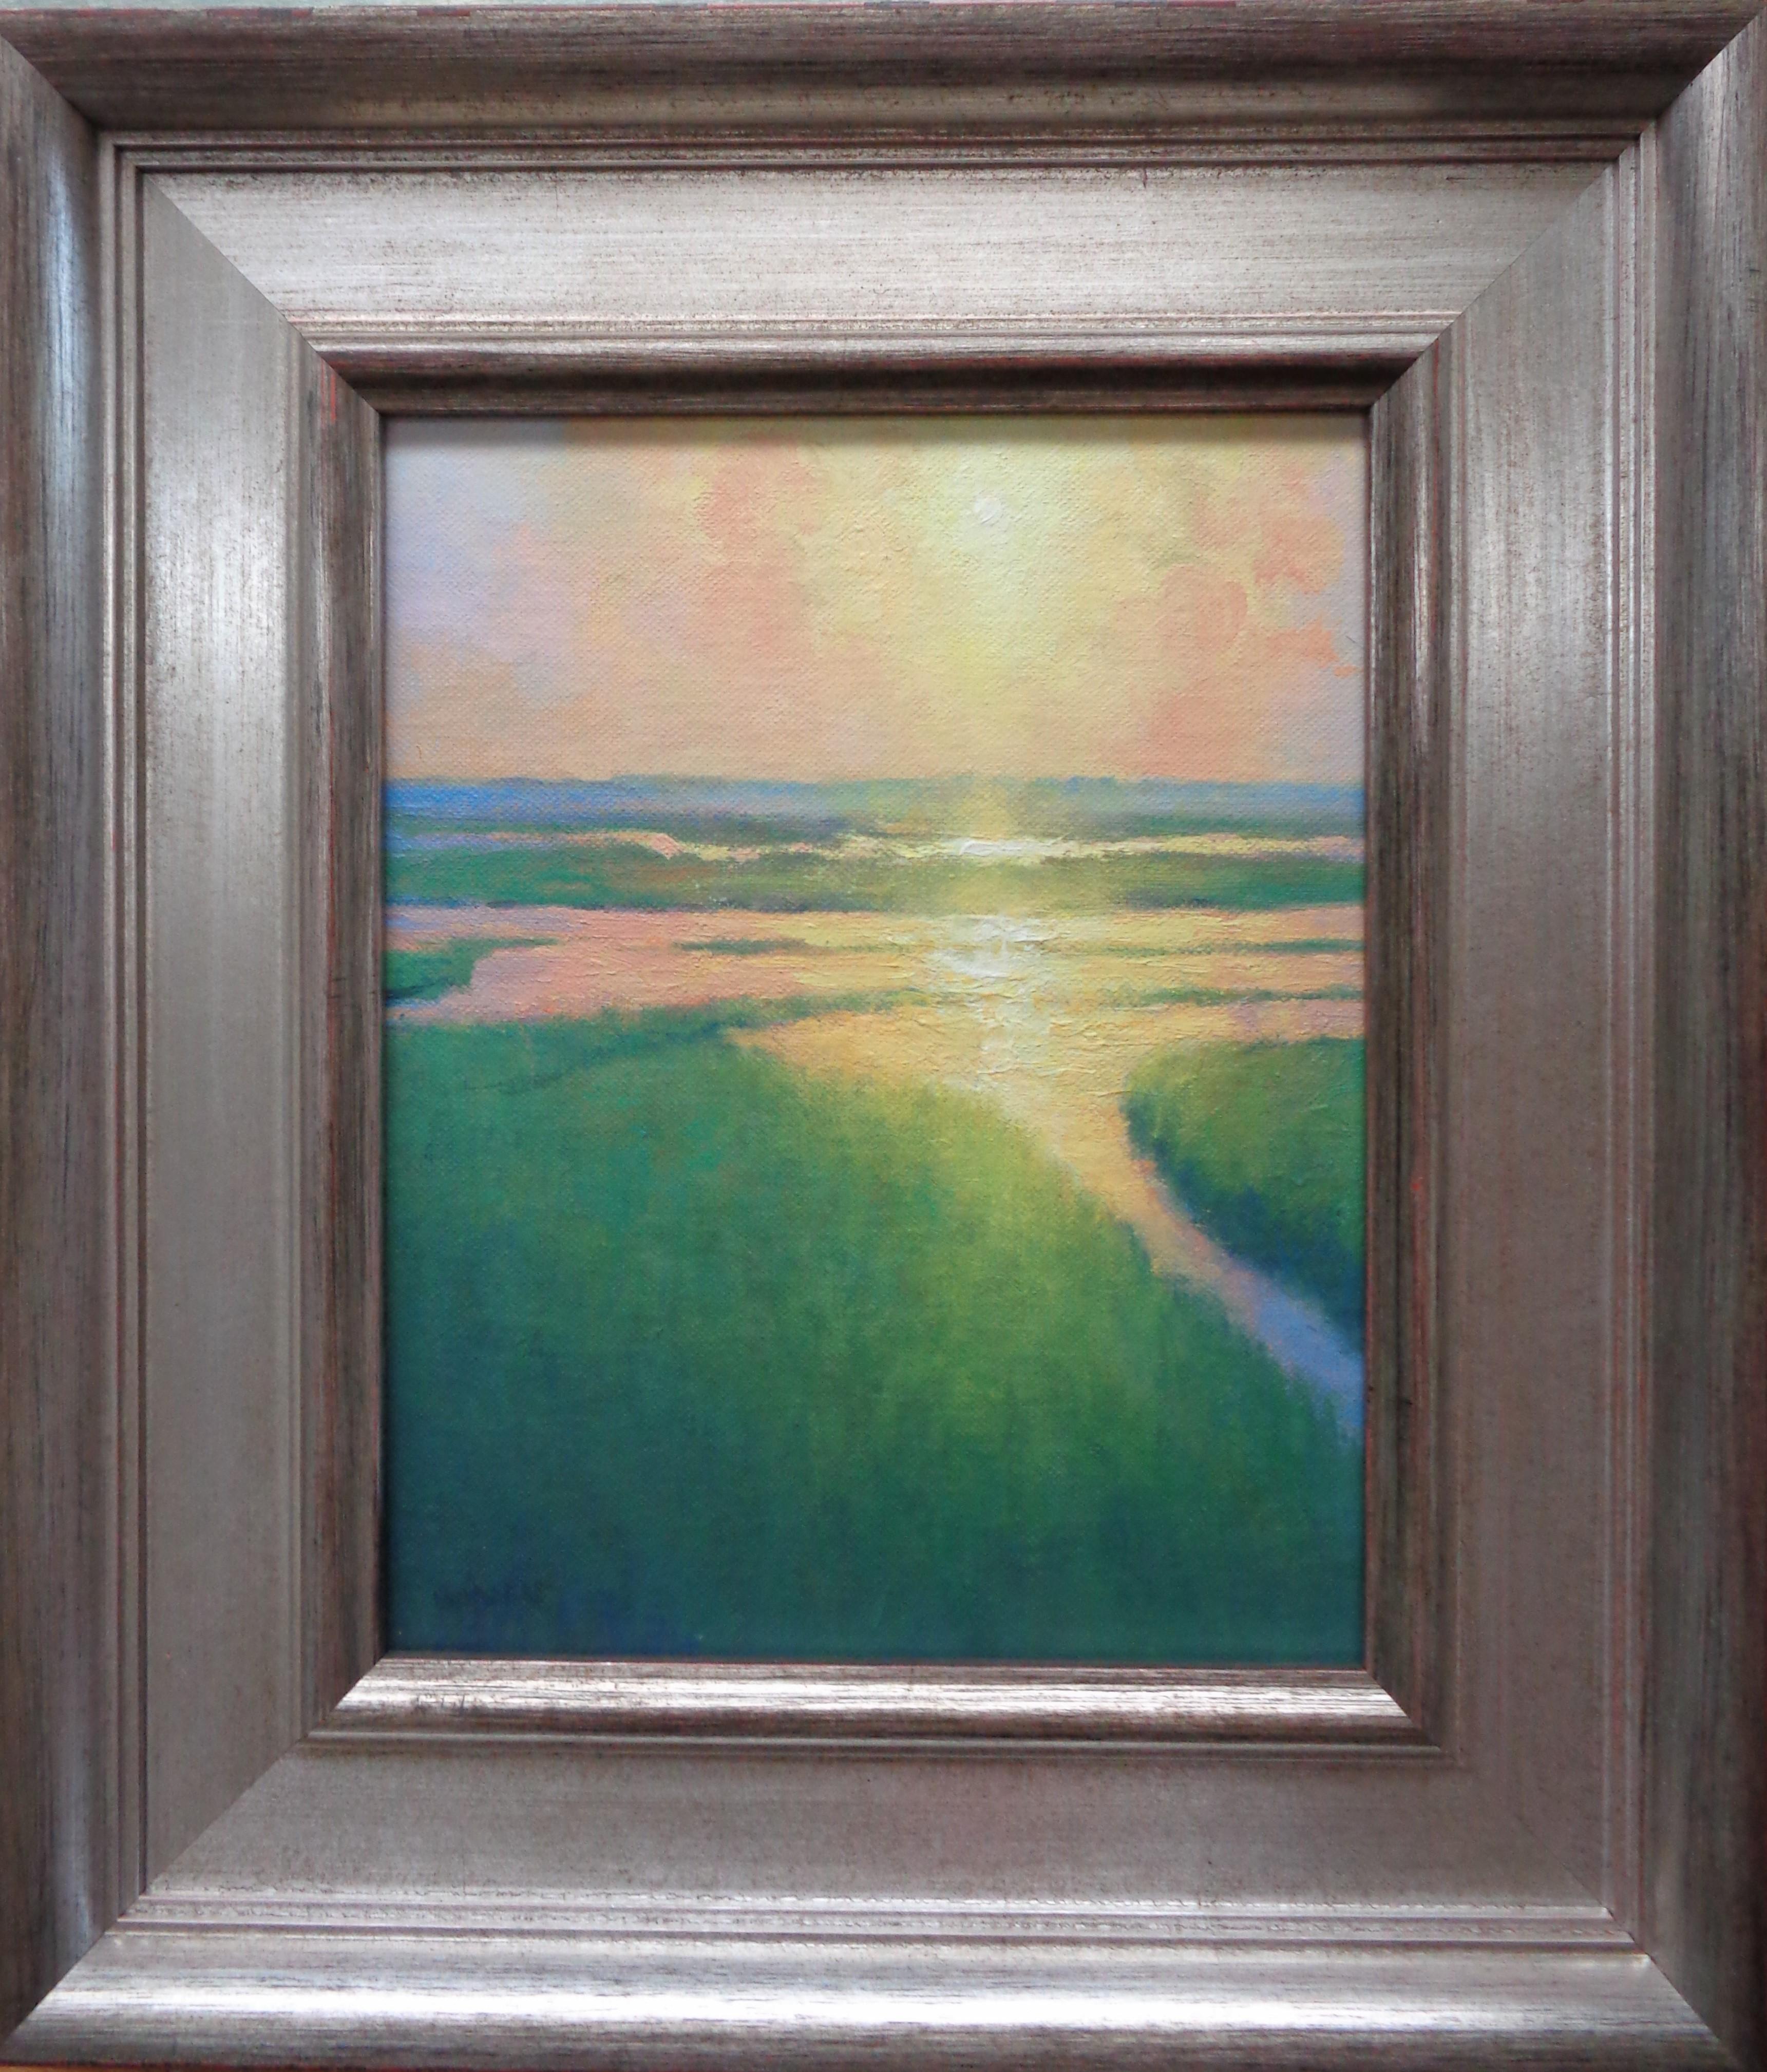 Morning Marsh Light II is an oil painting on canvas panel by award winning contemporary artist Michael Budden that showcases a beautiful sunrise awakening a glorious marsh view. This painting is new and the image measures 10 x 8 and is one of a